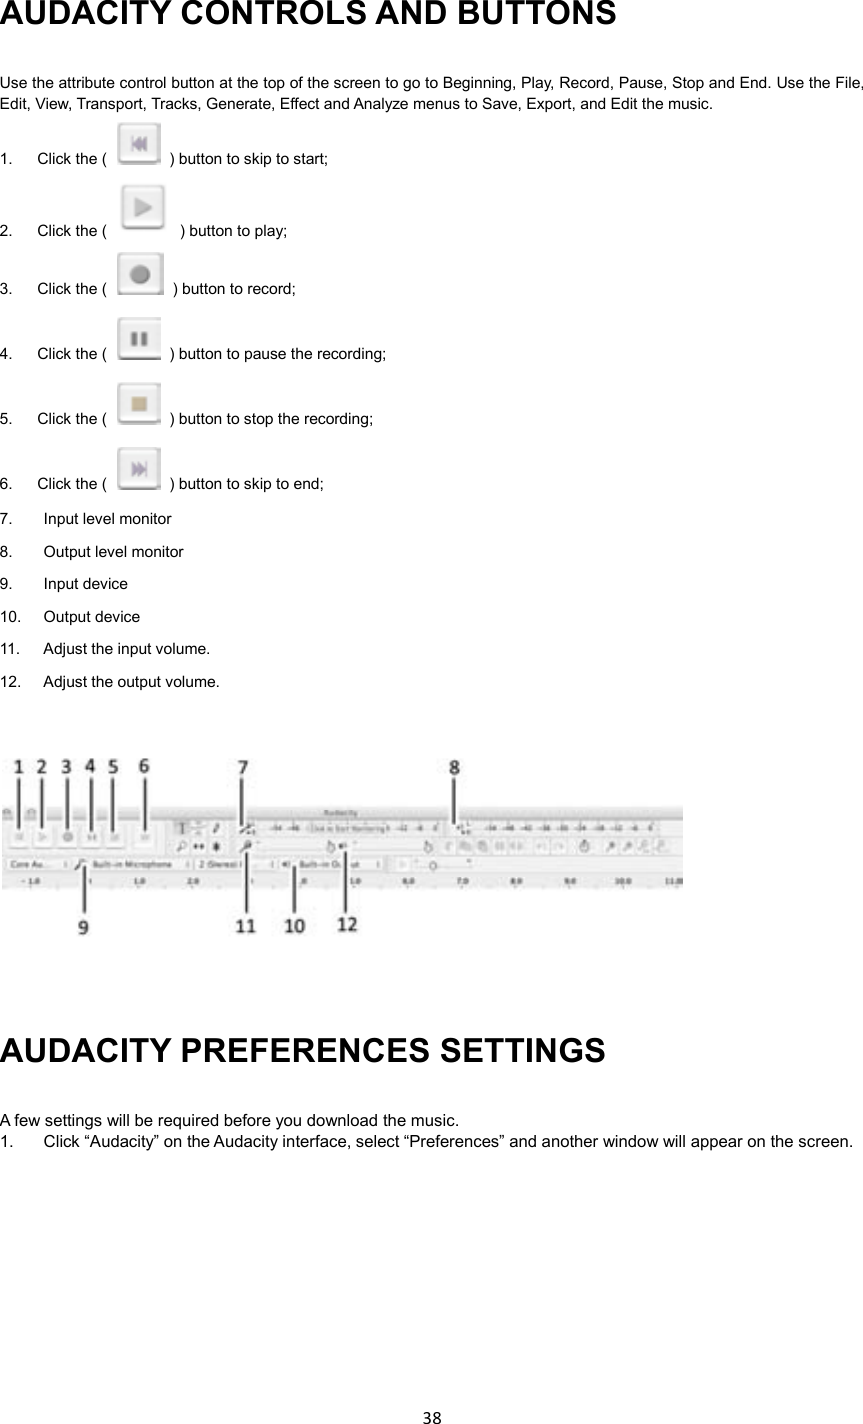 38    AUDACITY CONTROLS AND BUTTONS Use the attribute control button at the top of the screen to go to Beginning, Play, Record, Pause, Stop and End. Use the File, Edit, View, Transport, Tracks, Generate, Effect and Analyze menus to Save, Export, and Edit the music.   1.  Click the (    ) button to skip to start; 2.  Click the (    ) button to play; 3.  Click the (    ) button to record; 4.  Click the (    ) button to pause the recording; 5.  Click the (    ) button to stop the recording; 6.  Click the (    ) button to skip to end; 7.  Input level monitor 8.  Output level monitor 9.  Input device 10.    Output device 11.  Adjust the input volume. 12.  Adjust the output volume.    AUDACITY PREFERENCES SETTINGS A few settings will be required before you download the music. 1.  Click “Audacity” on the Audacity interface, select “Preferences” and another window will appear on the screen.  